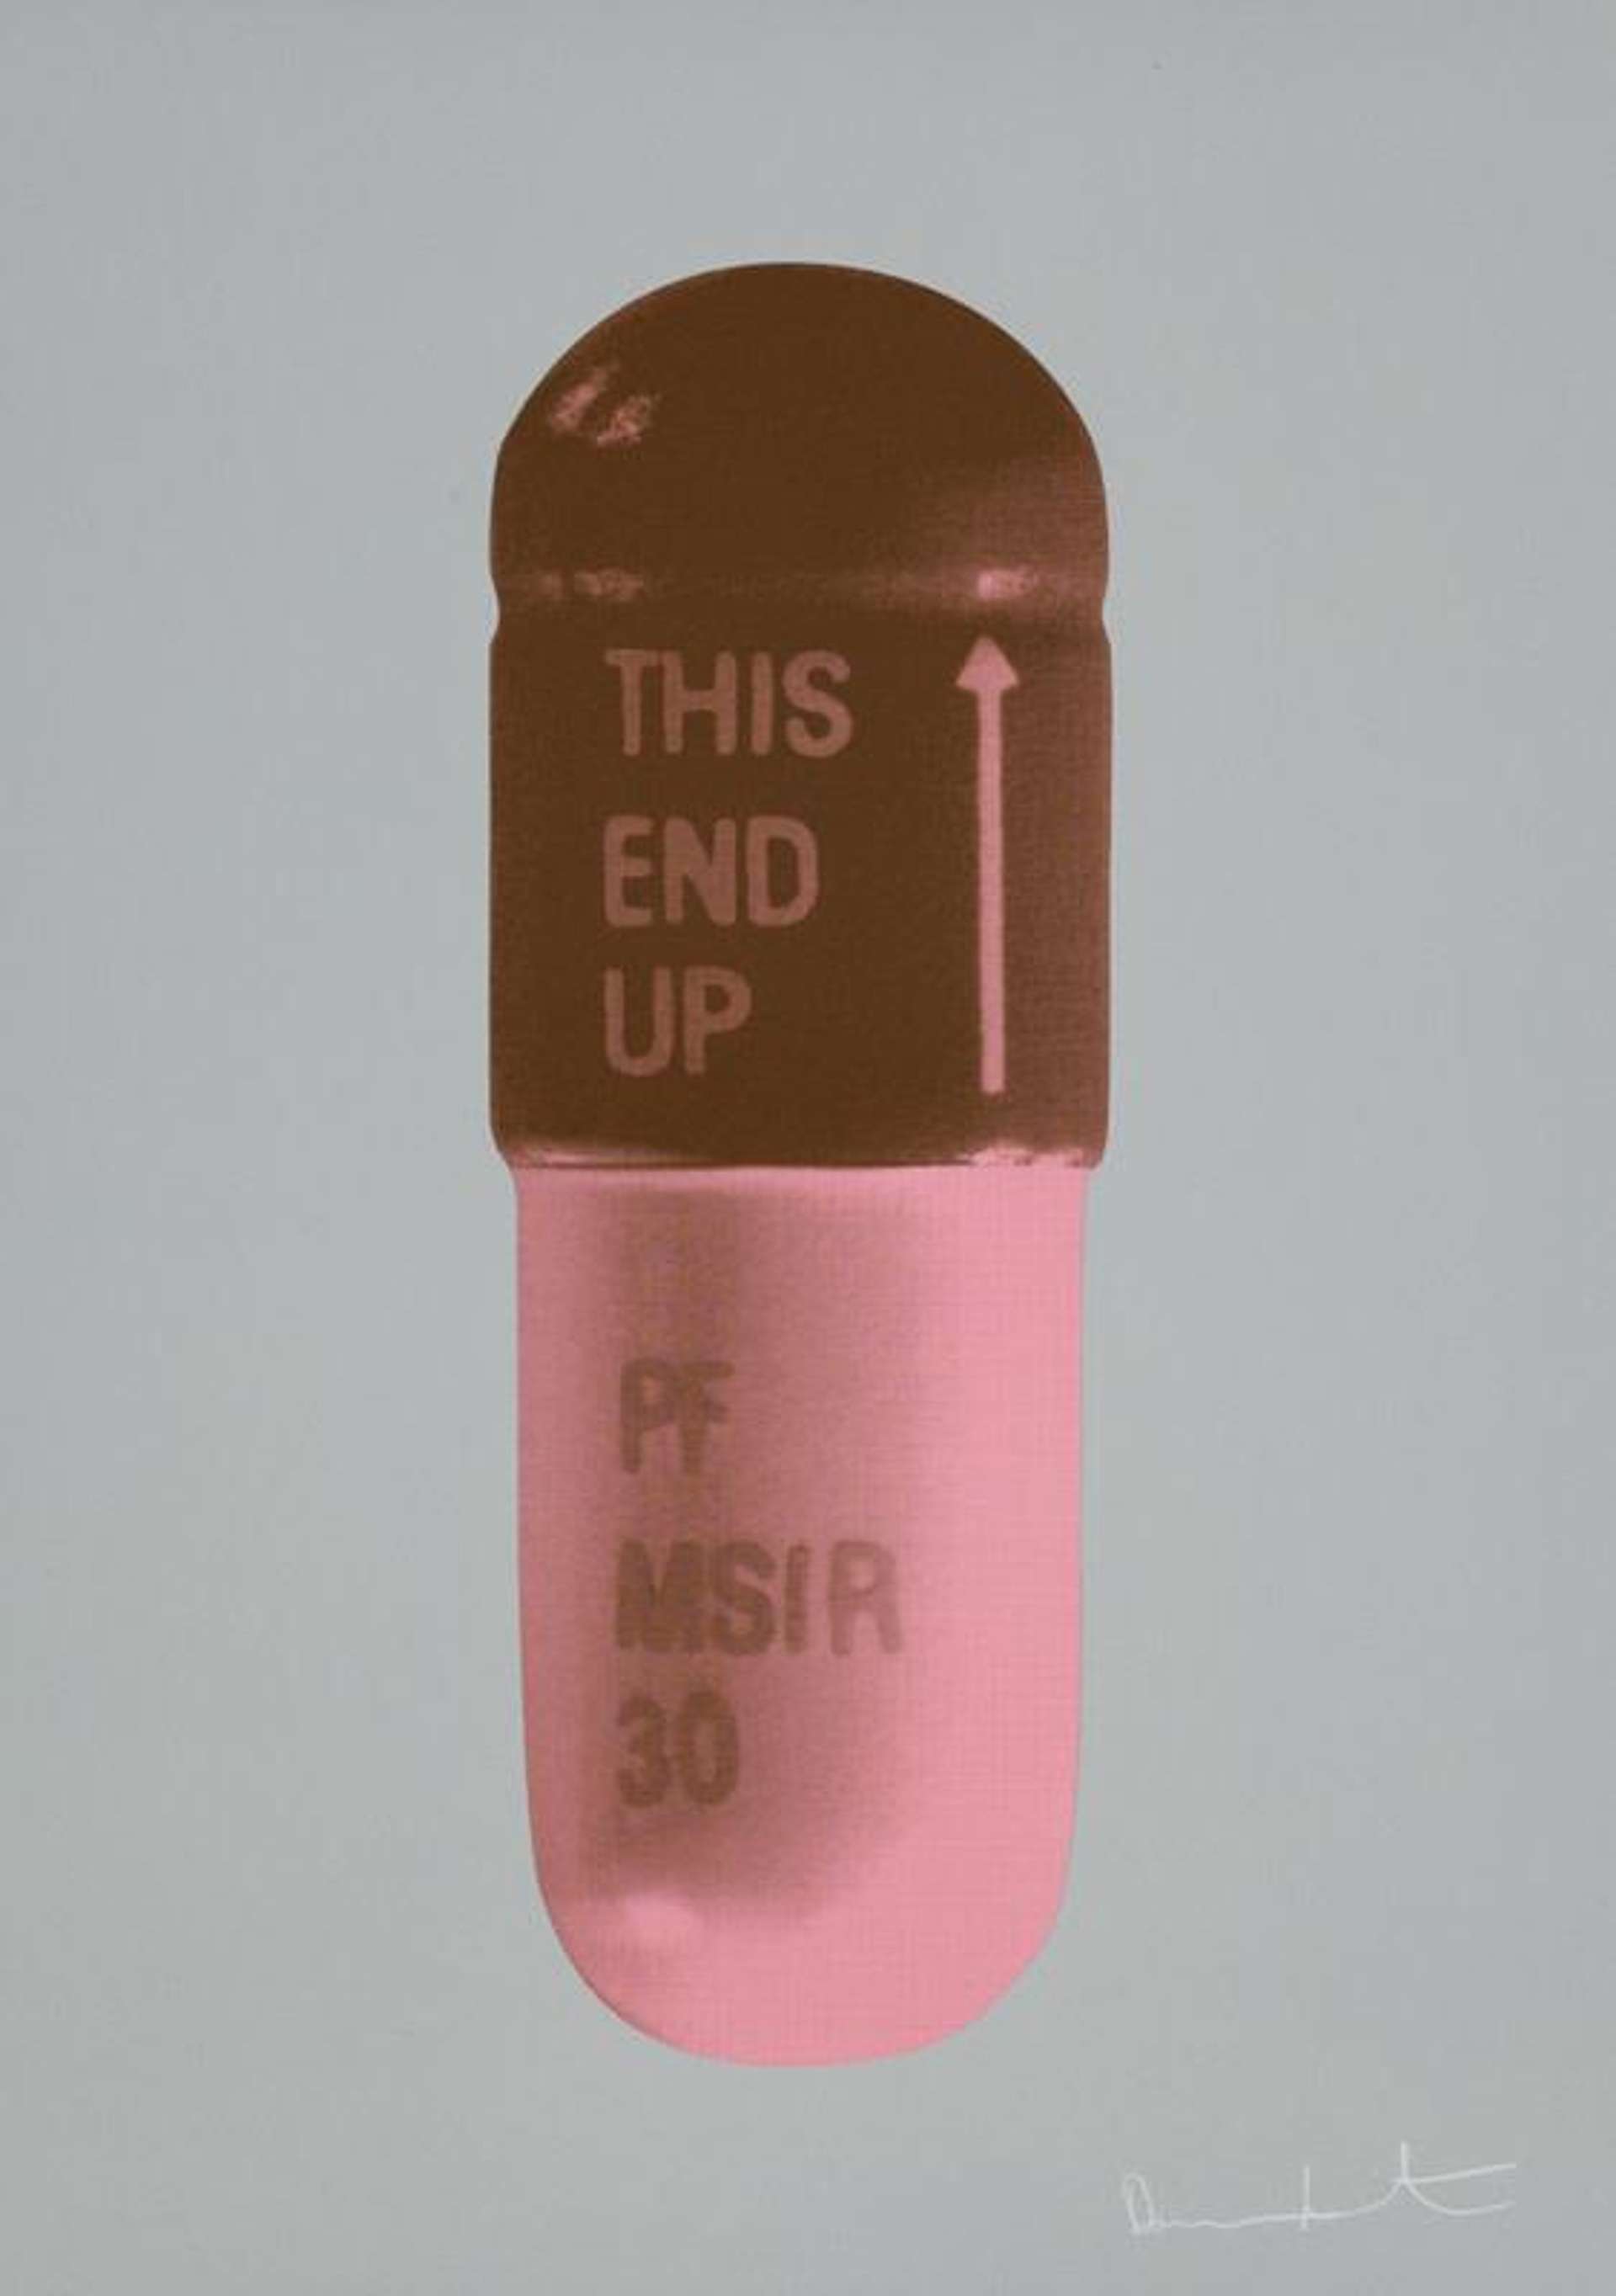 Damien Hirst’s The Cure (frigate, chocolate, rose pink). A screenprint of a pink and brown pharmaceutical pill against a grey background. 